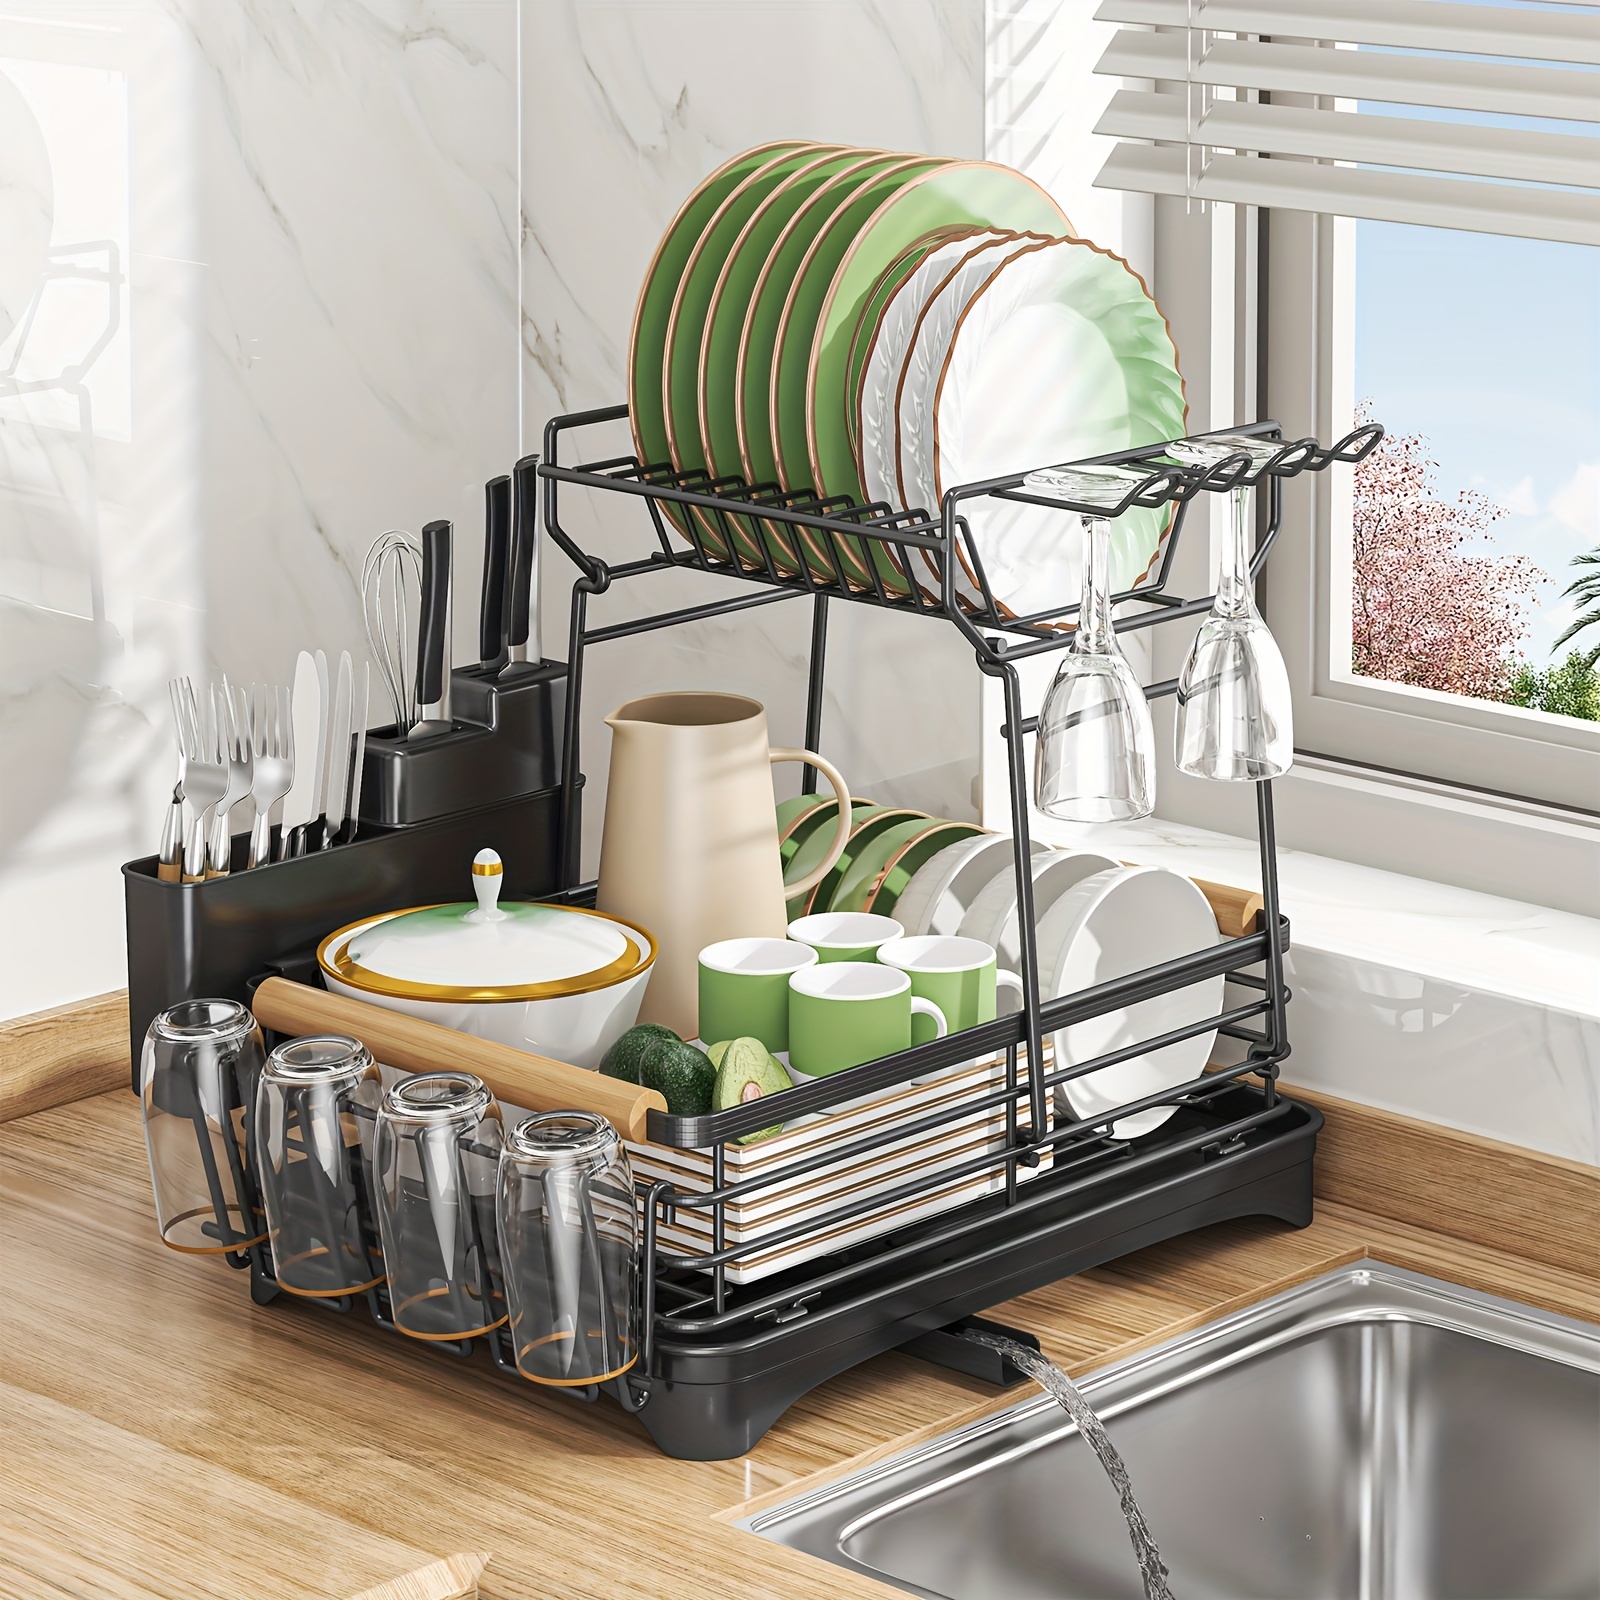 2-tier Dish Dring Rack For Kitchen Counter, Dish Racks For Drying Dishes  With Drainboard, 2-tier Dish Drainer For Cabinet, Dish Drainer With Wine  Glass Holder, Utensil Holder, Cup Holder And Cutting Board